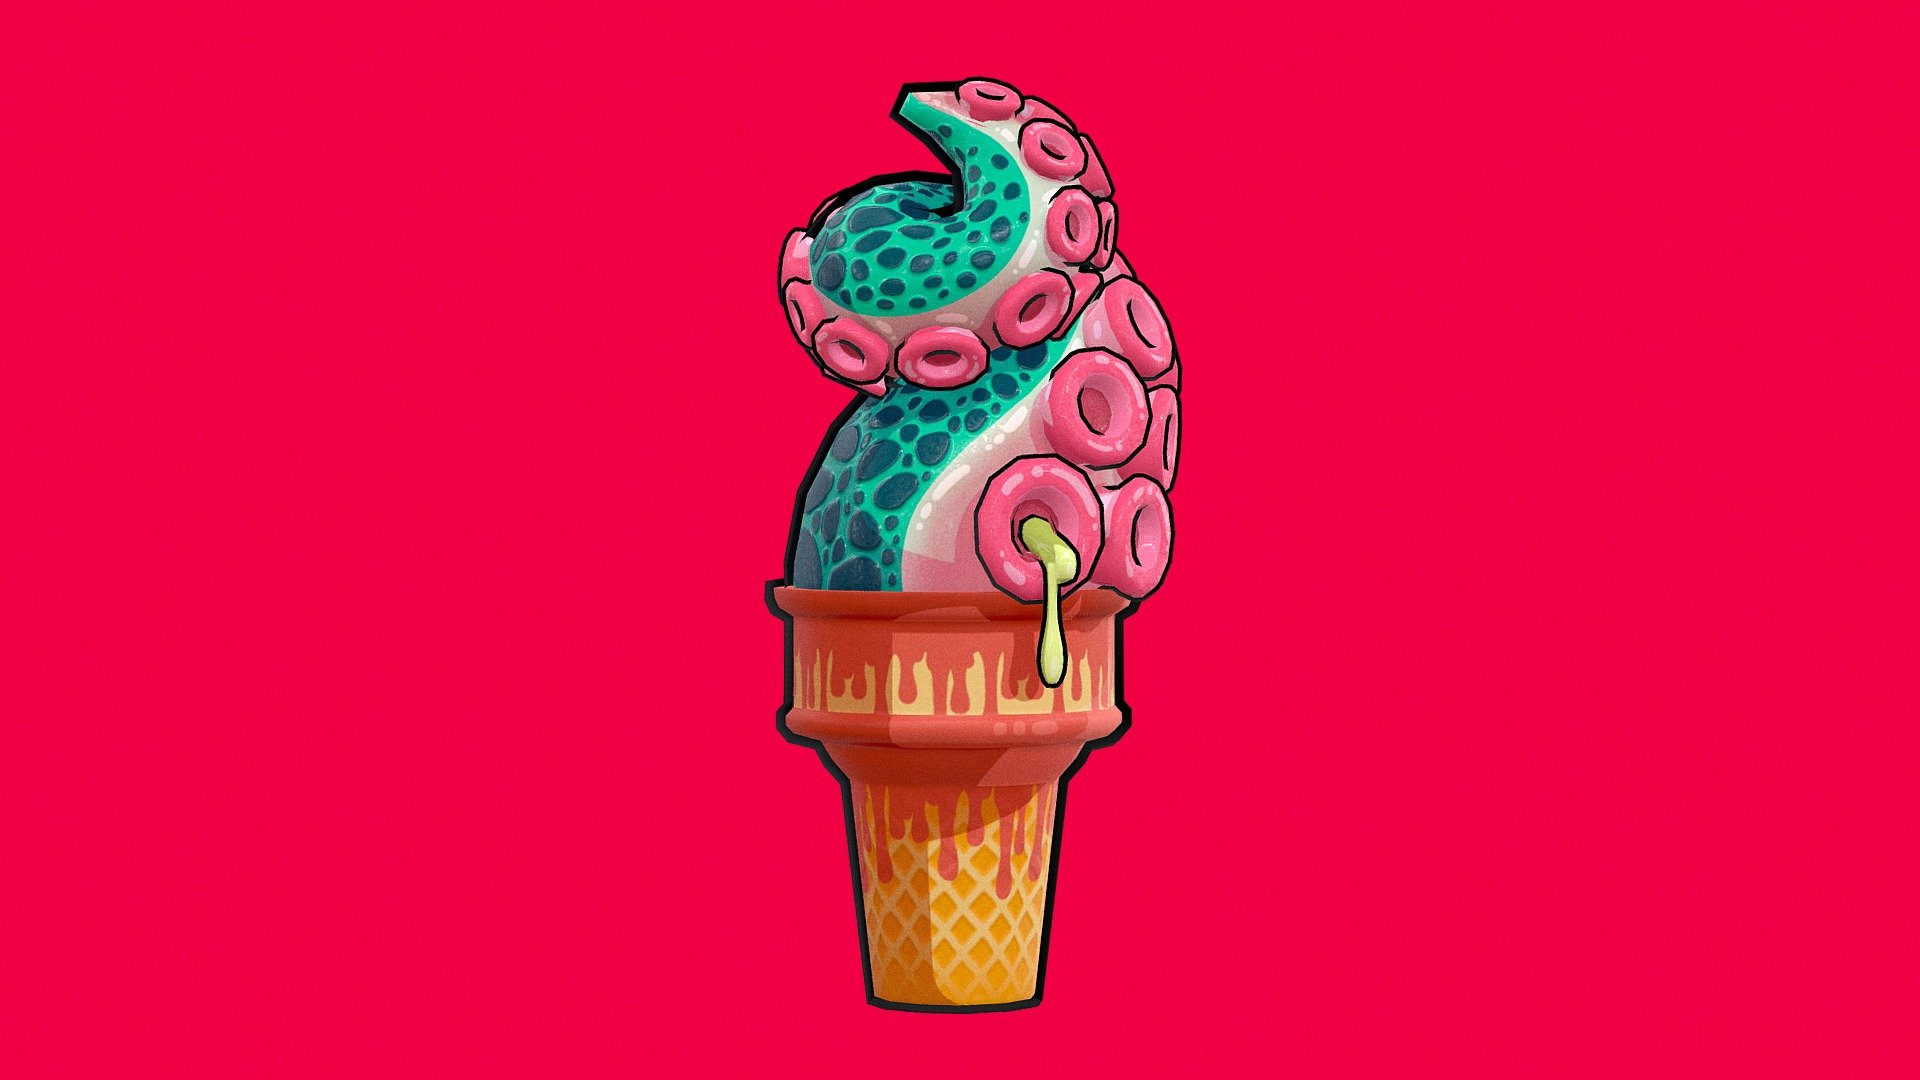 Summer is here!
Made this piece to practice my texturing skills. The original illustration was created by Jennifer Smith, she has a whole series of different spooky ice cream, check out: https://www.behance.net/gallery/41928757/Tentacle-Treats-Vector-Illustration - Ice Cream Season! - 3D model by Citflo (@allegory.fake) 3d model